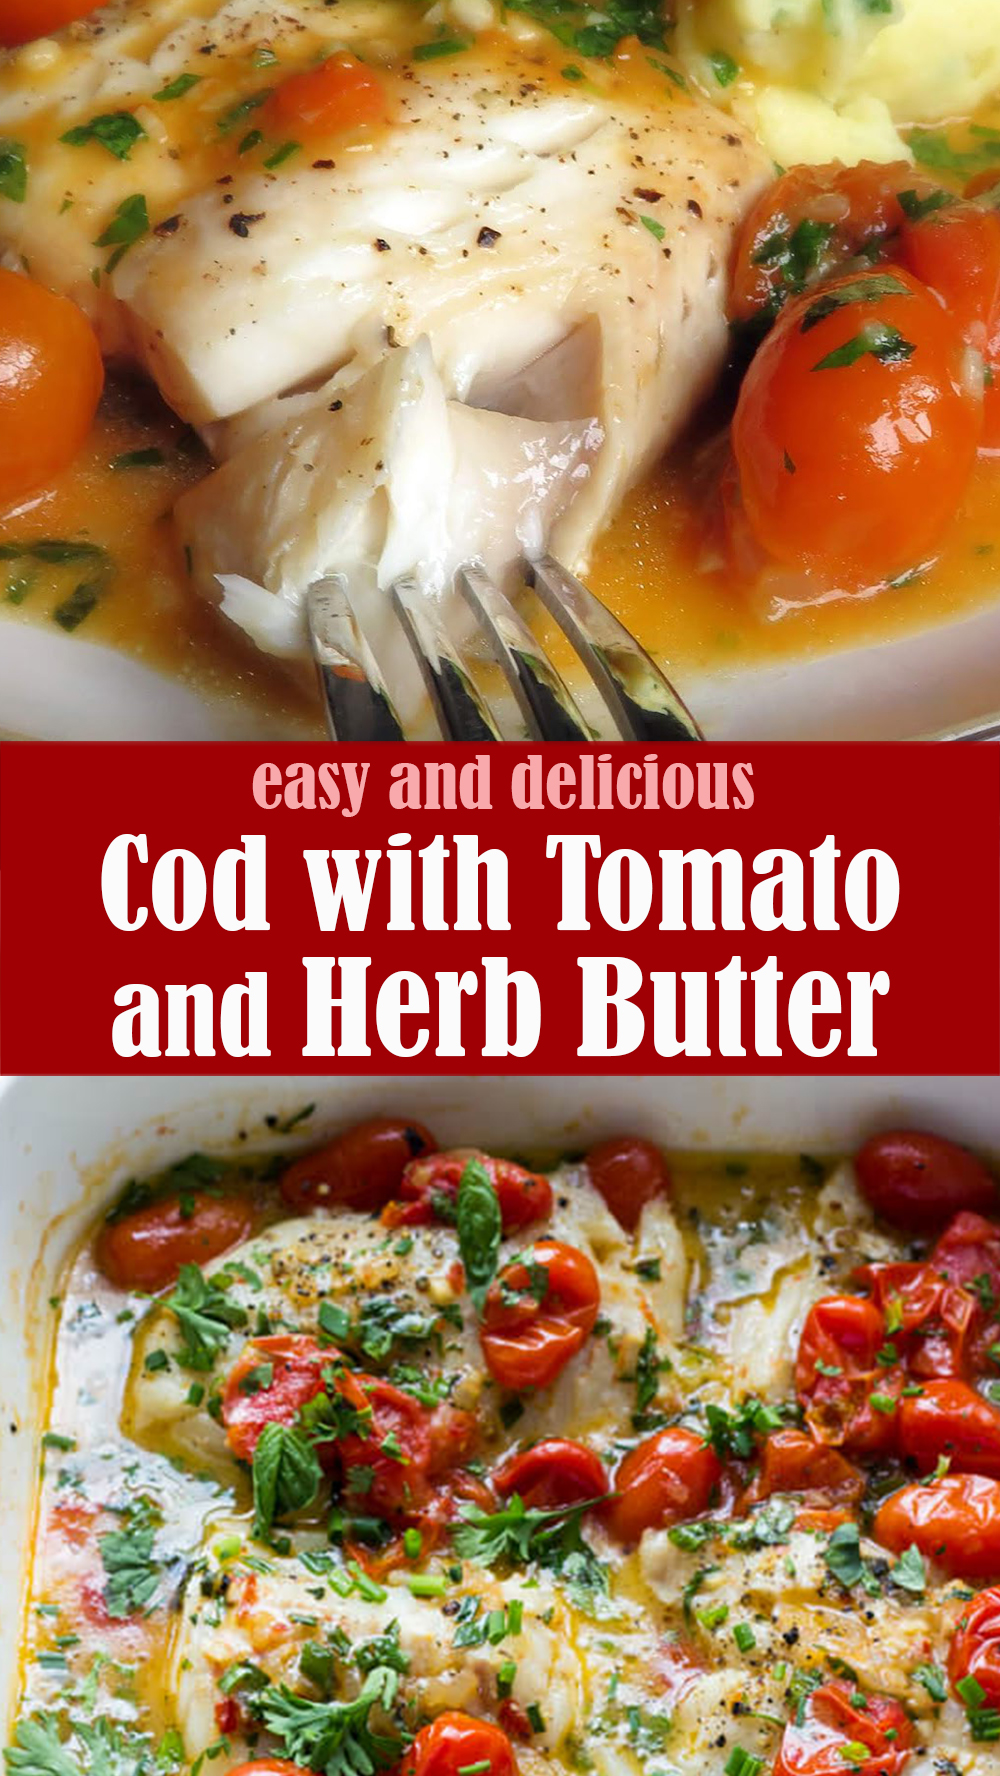 Easy Cod with Tomato and Herb Butter